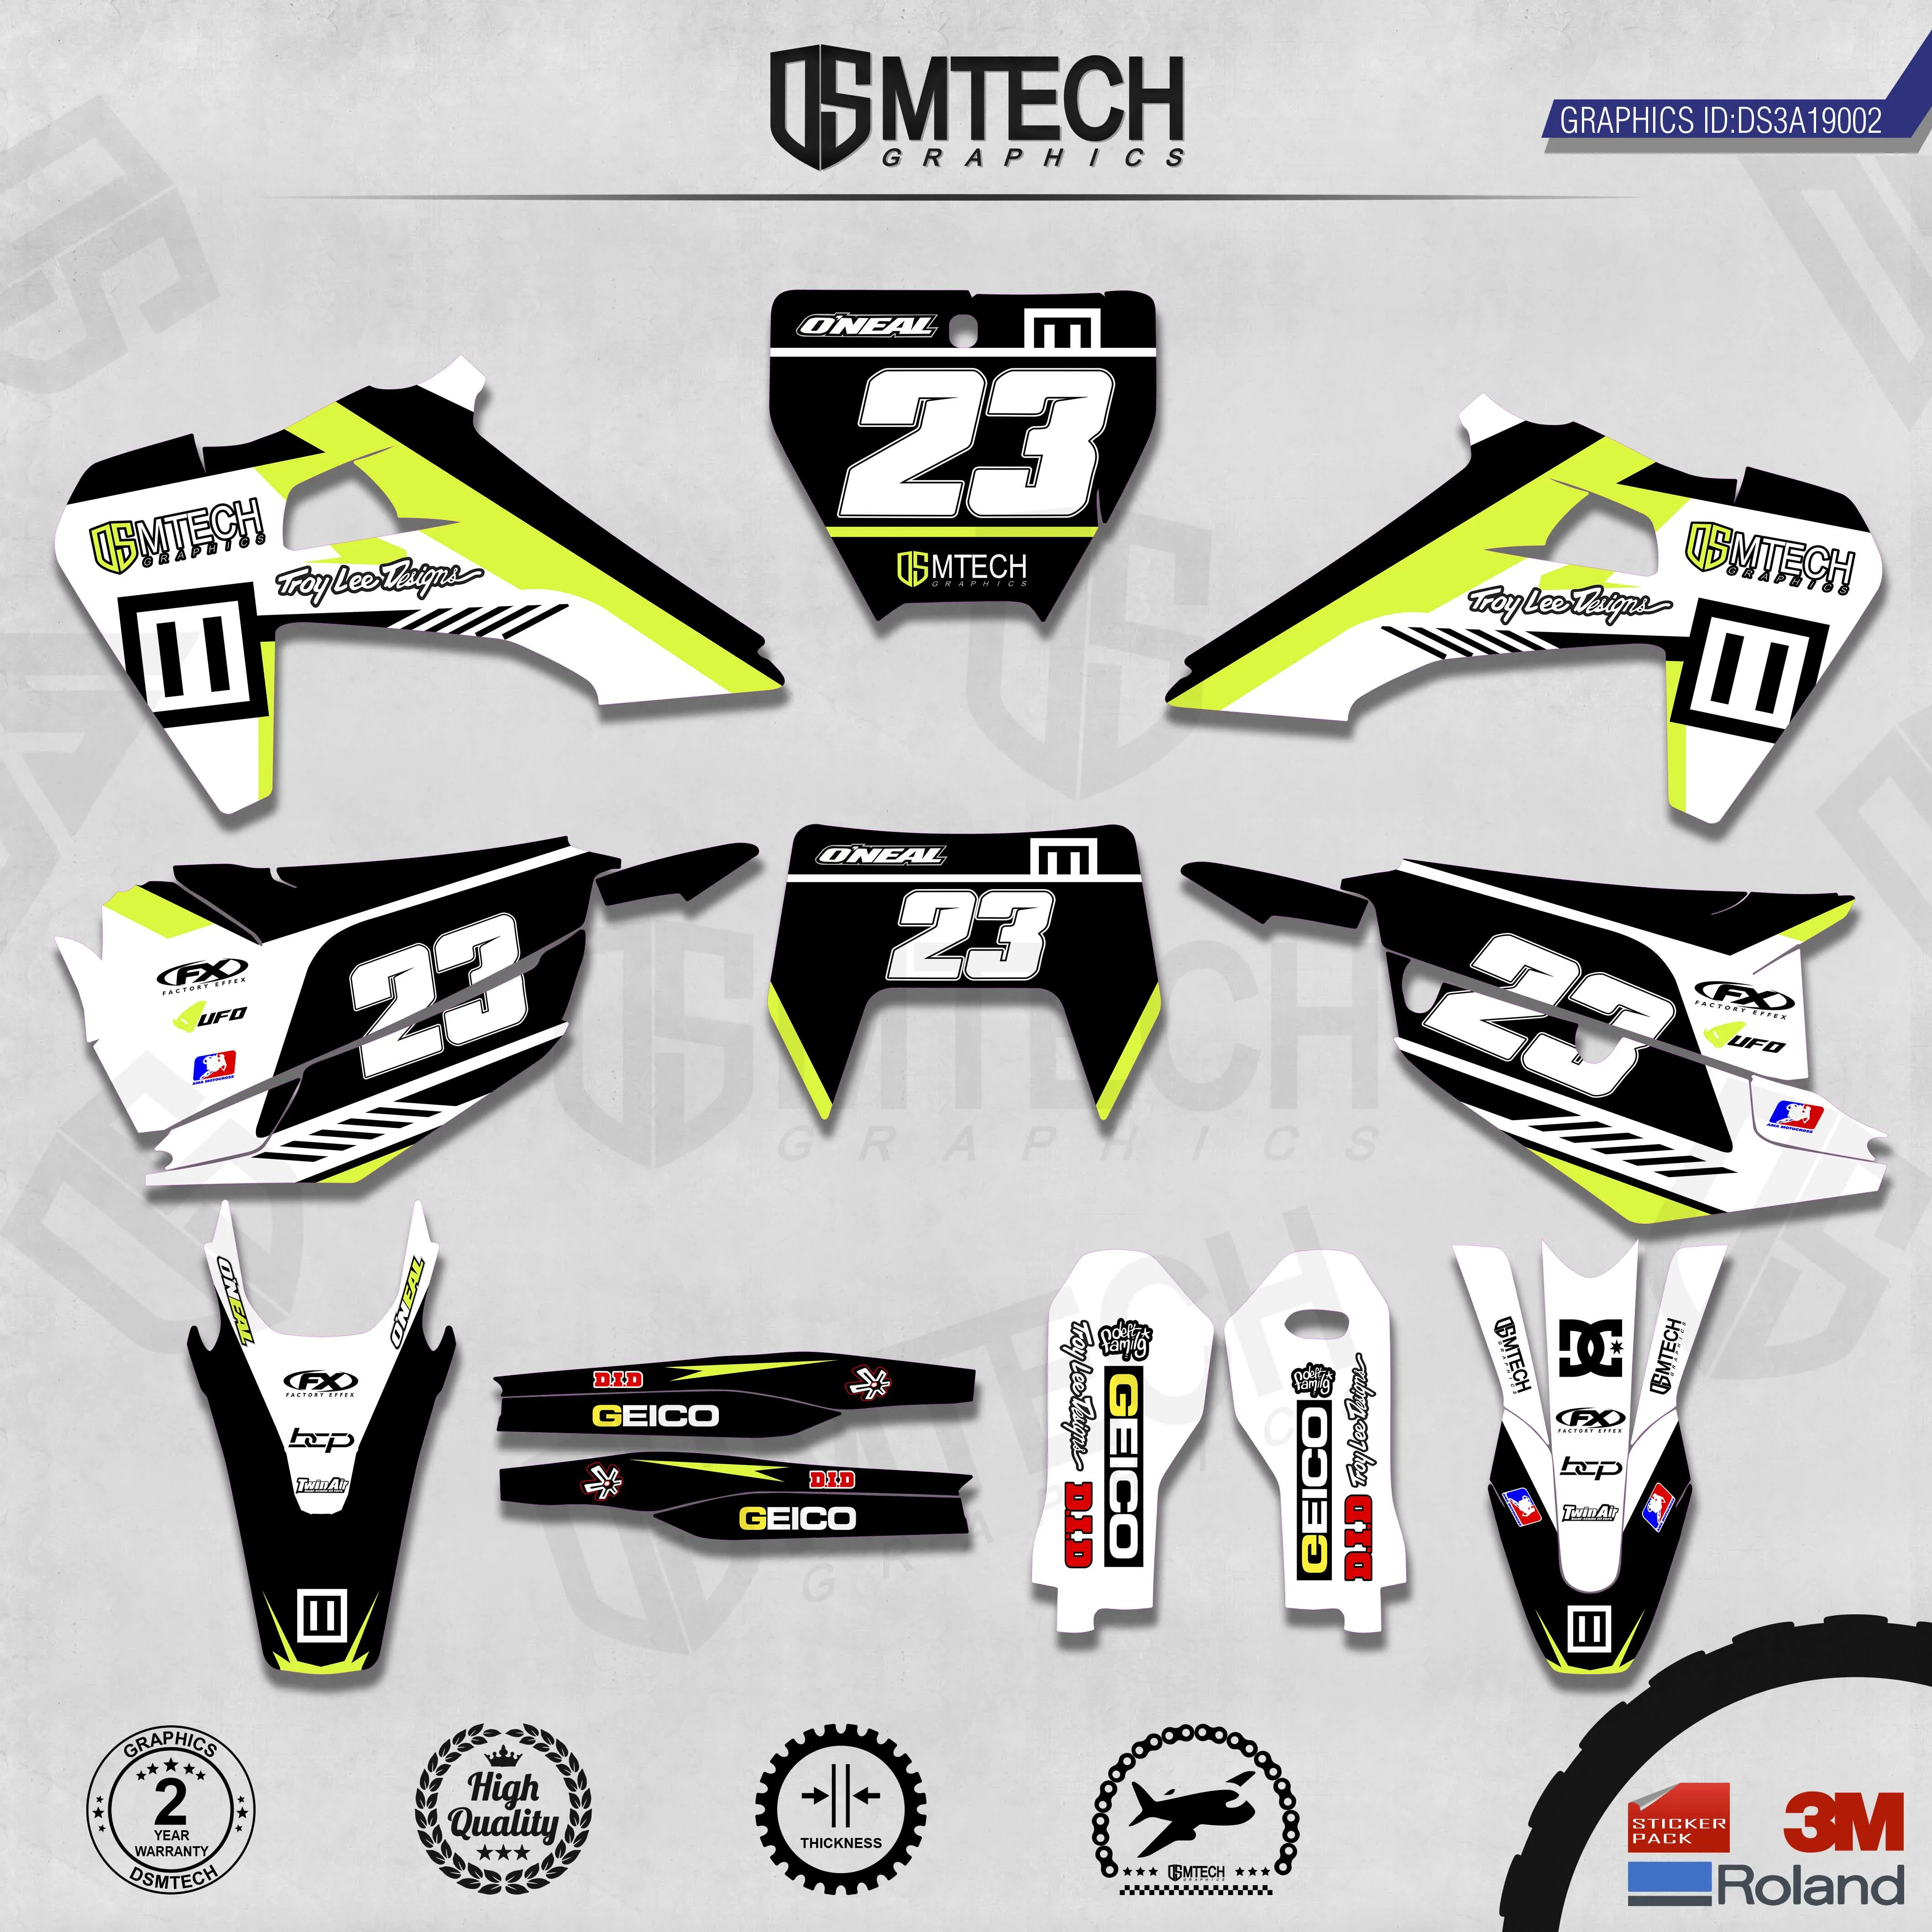 DSMTECH Customized Team Graphics Backgrounds Decals 3M Custom Stickers For TC FC TX FX FS 2019-2021 TE FE 2020-2022 002